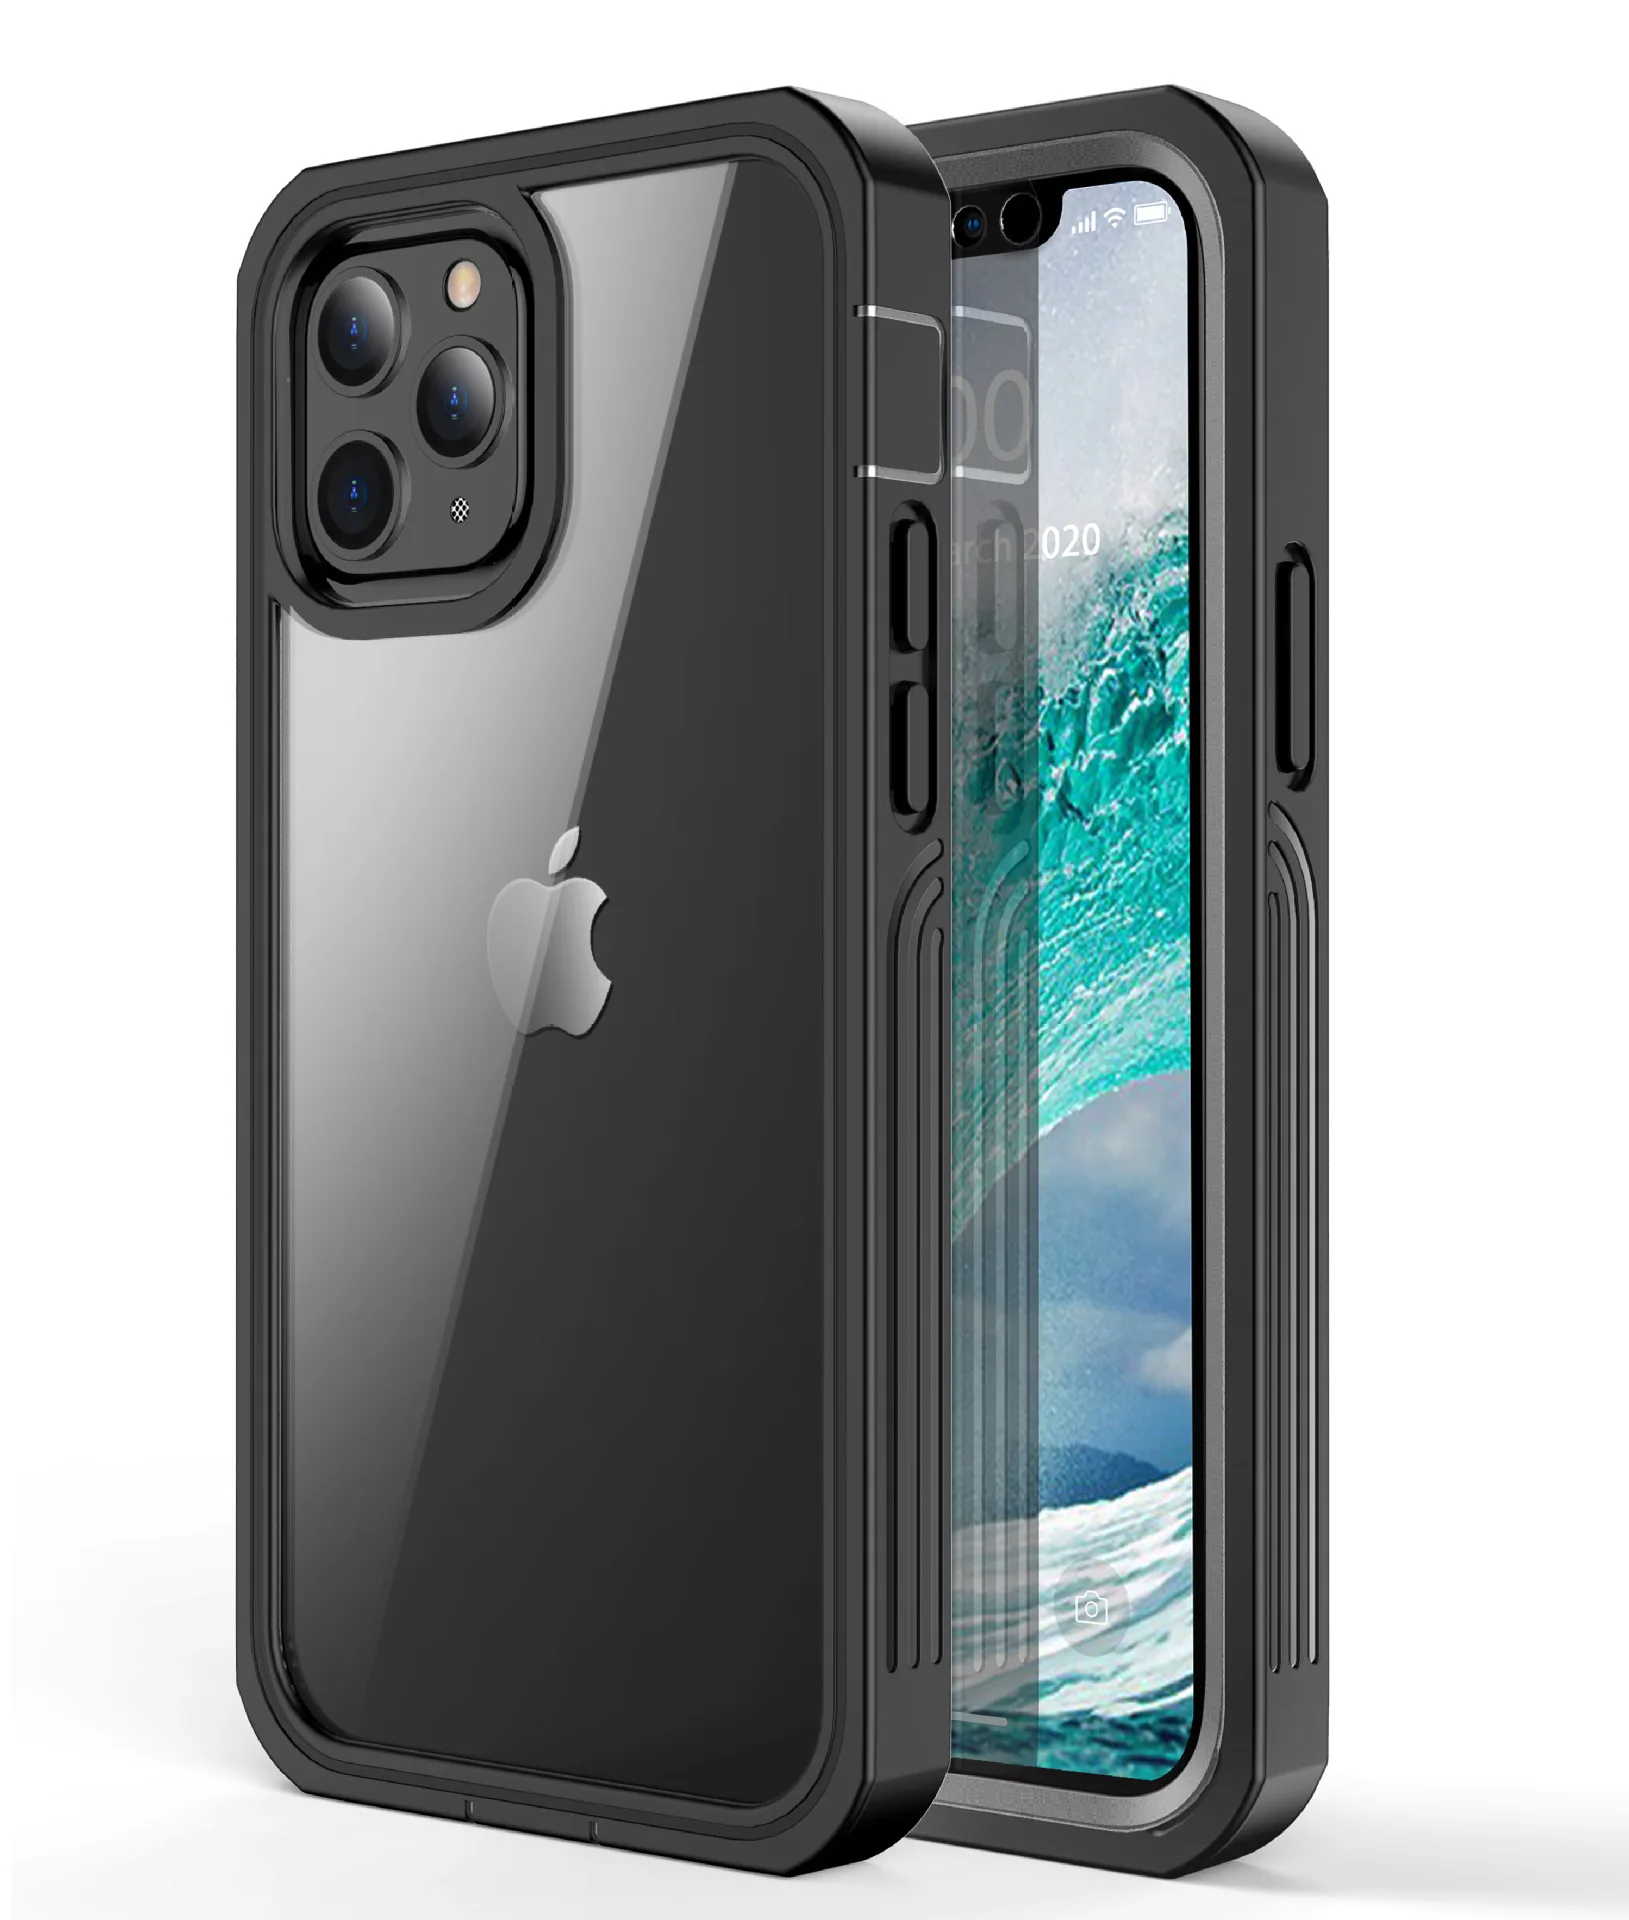 

Compatible with iPhone 13 Waterproof Case, Built-in Screen Protector Full-Body Rugged Bumper Sealed Cover Shockproof case, Multiple colors